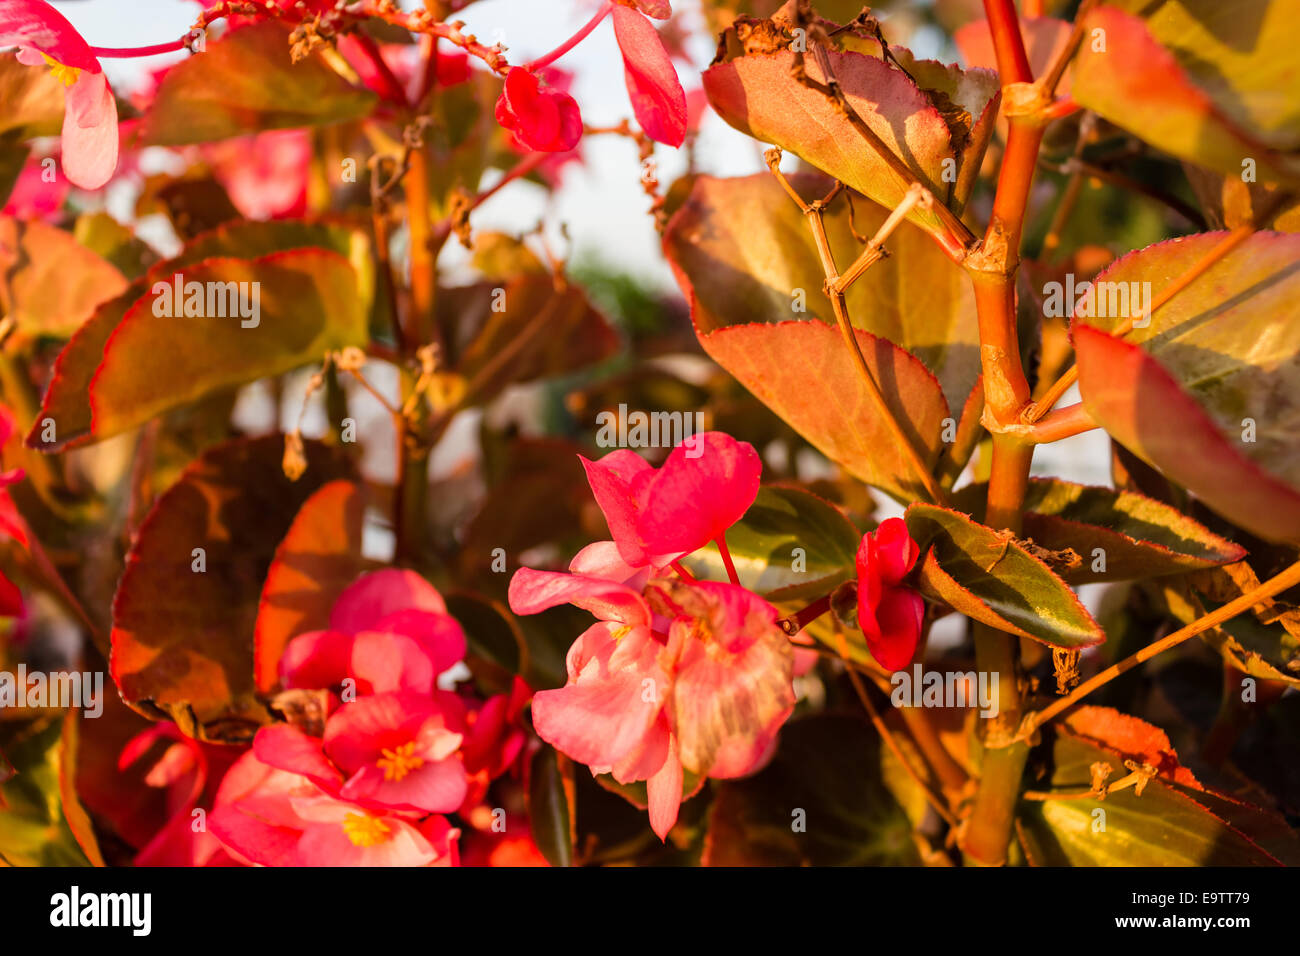 Bush of begonia flowers, succulent plant with green and brown tender leaves, brtanches and trunk Stock Photo